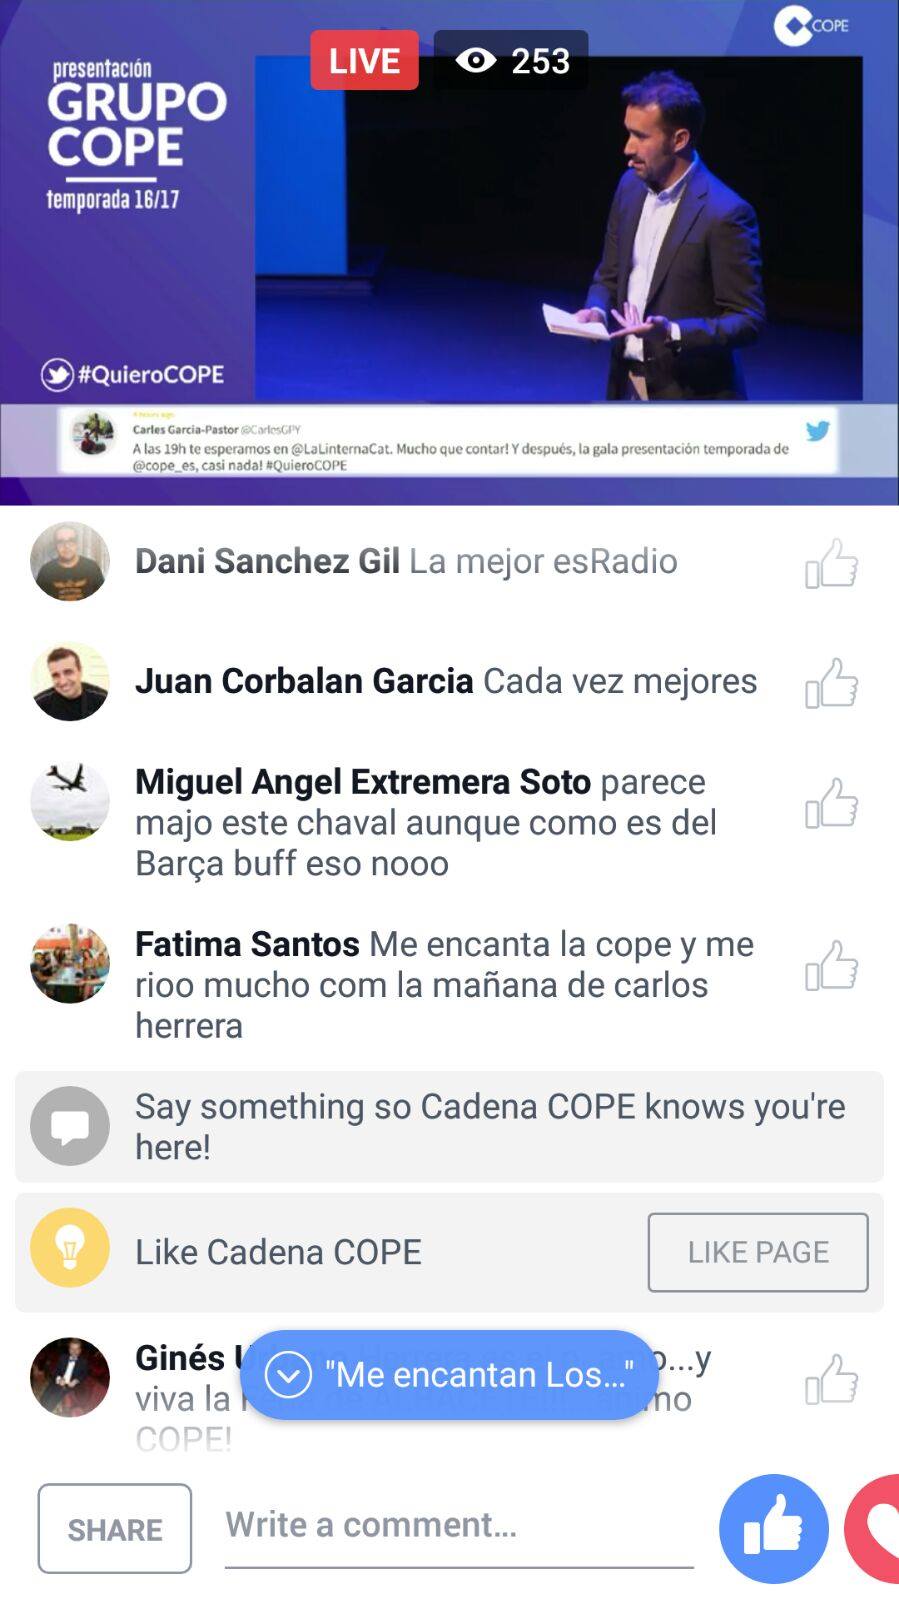 COPE live feed